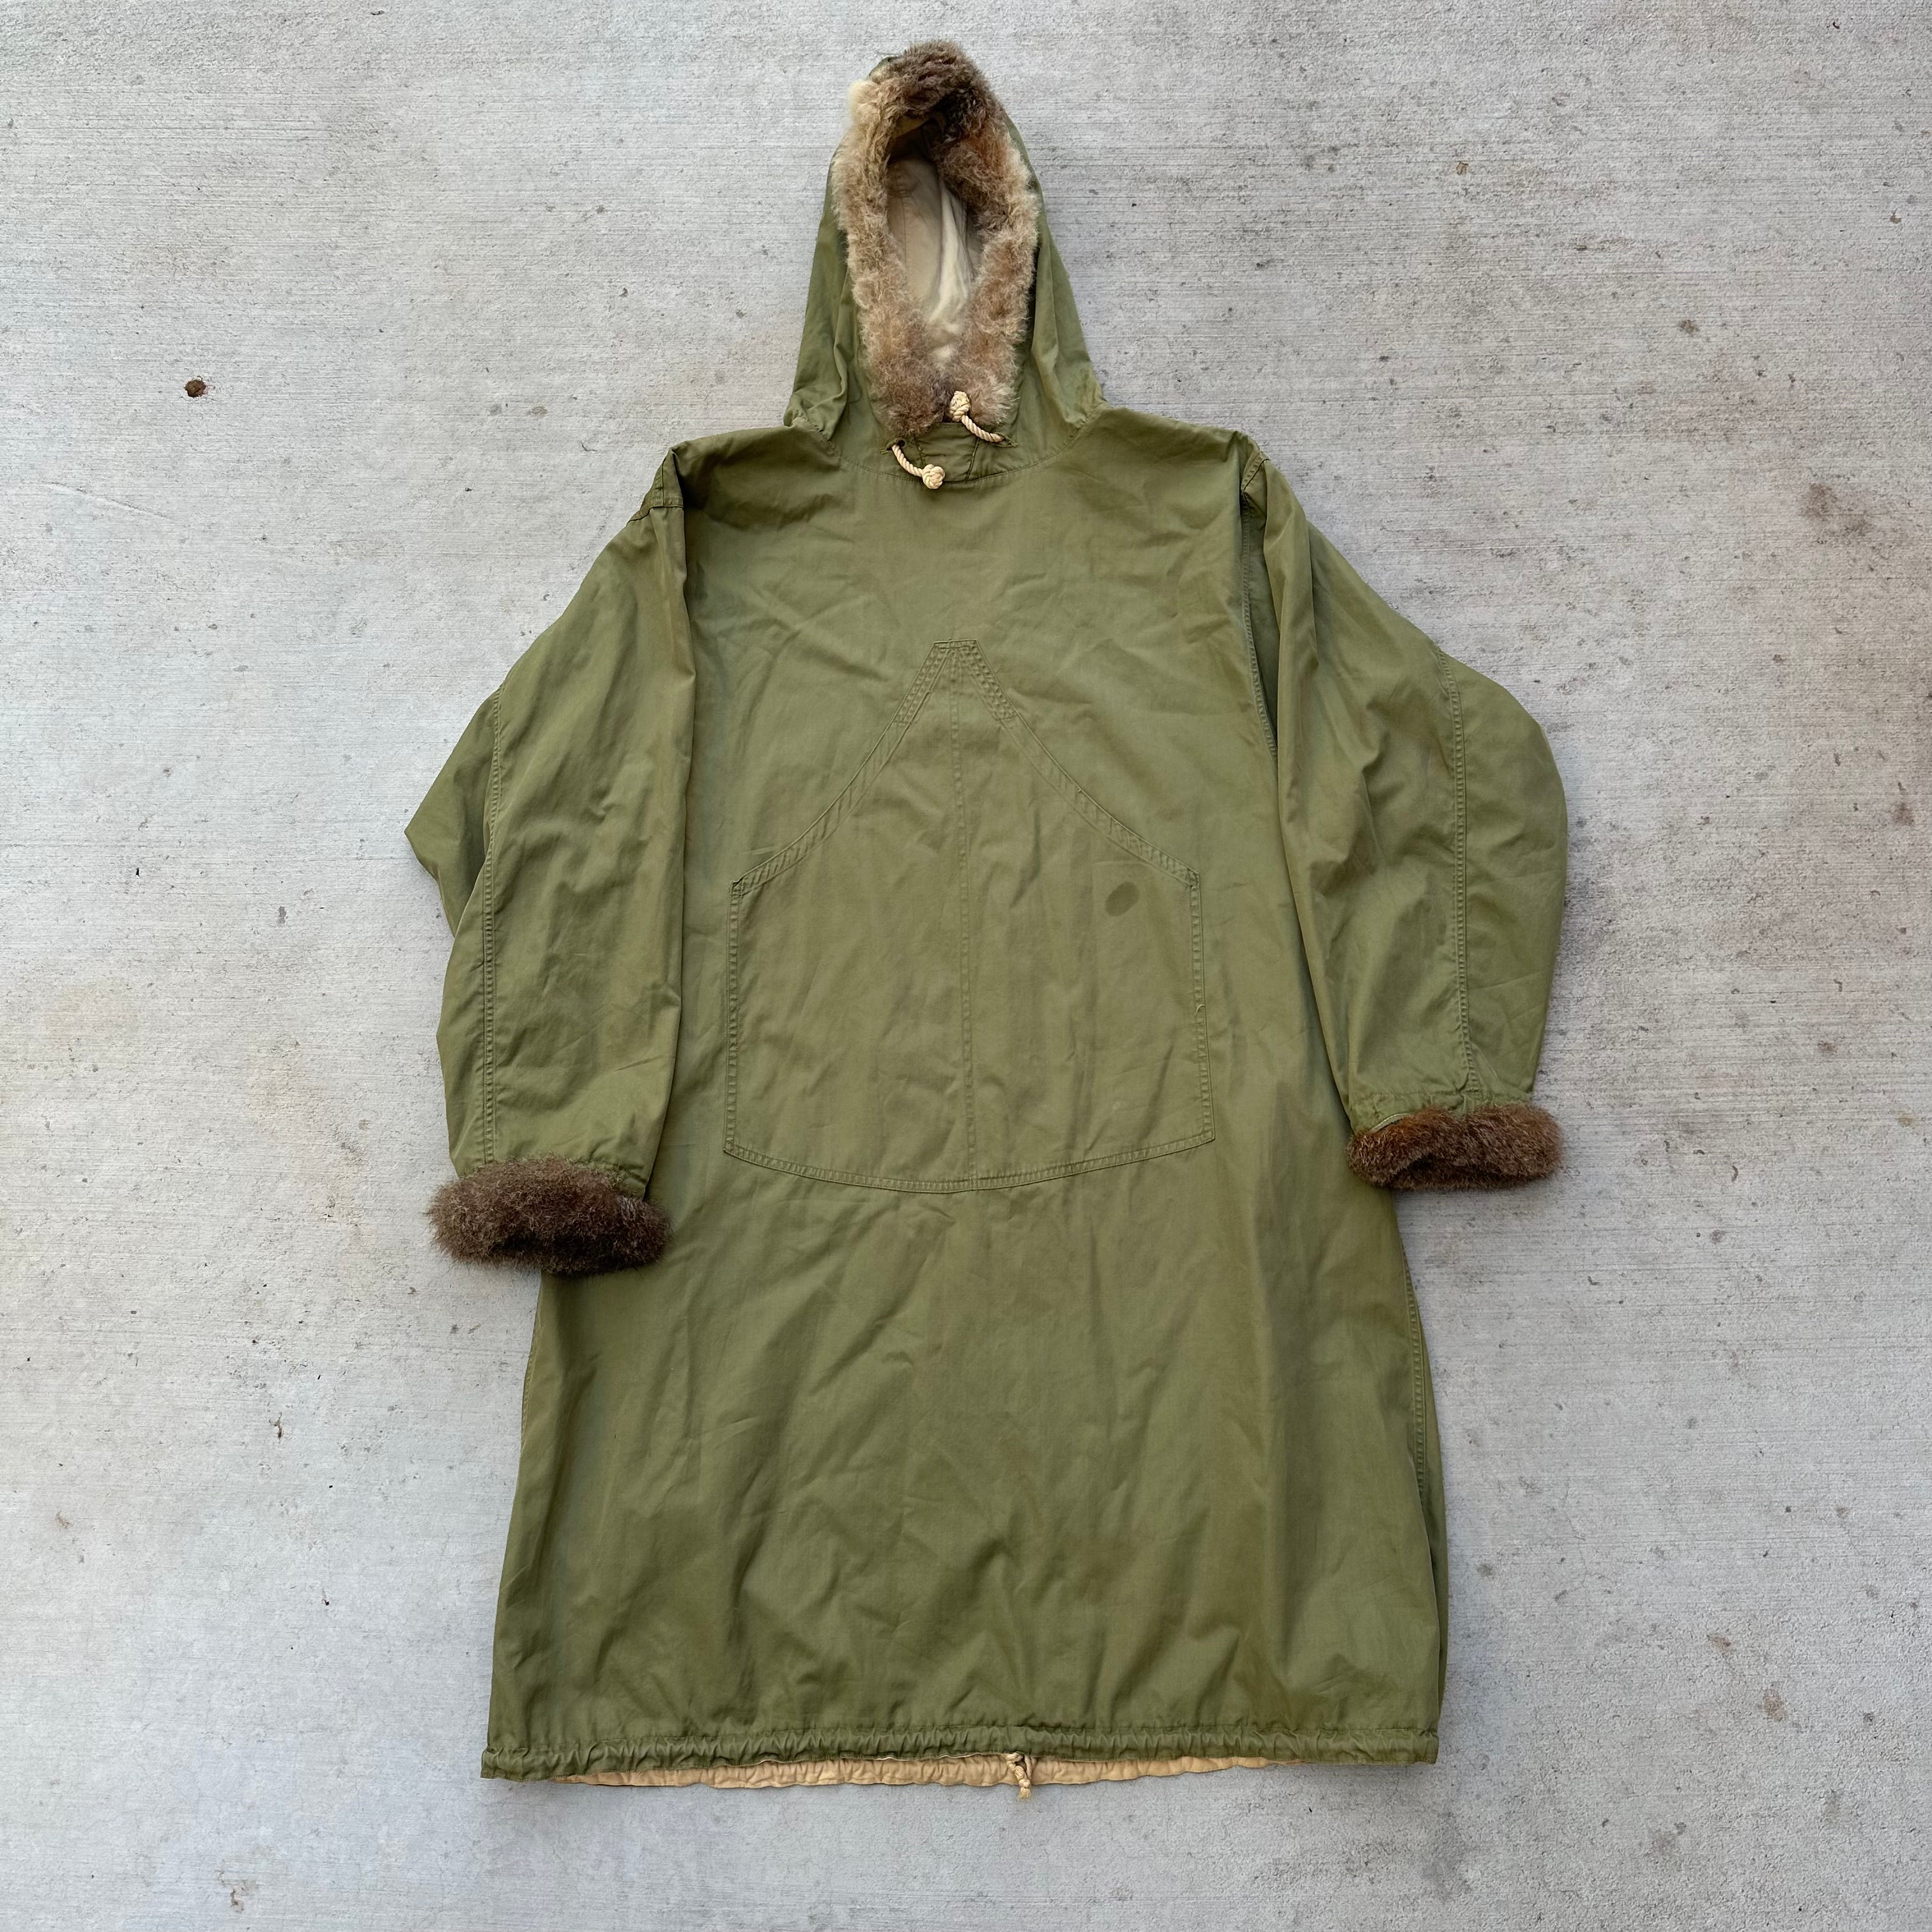 1940’s WWII 10th Mountain Division Parka XL